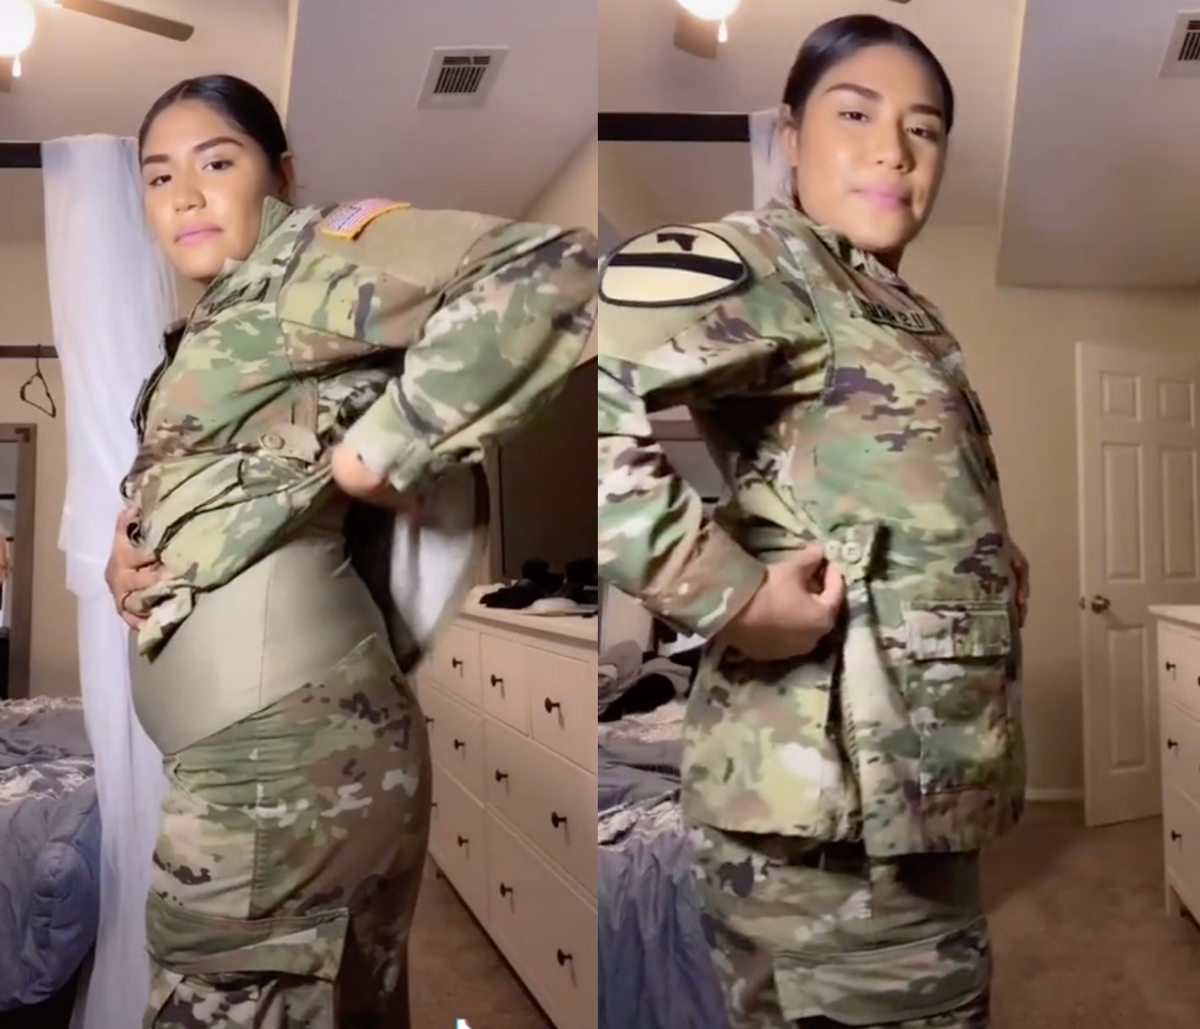 Military mom reveals what her maternity uniform looks like